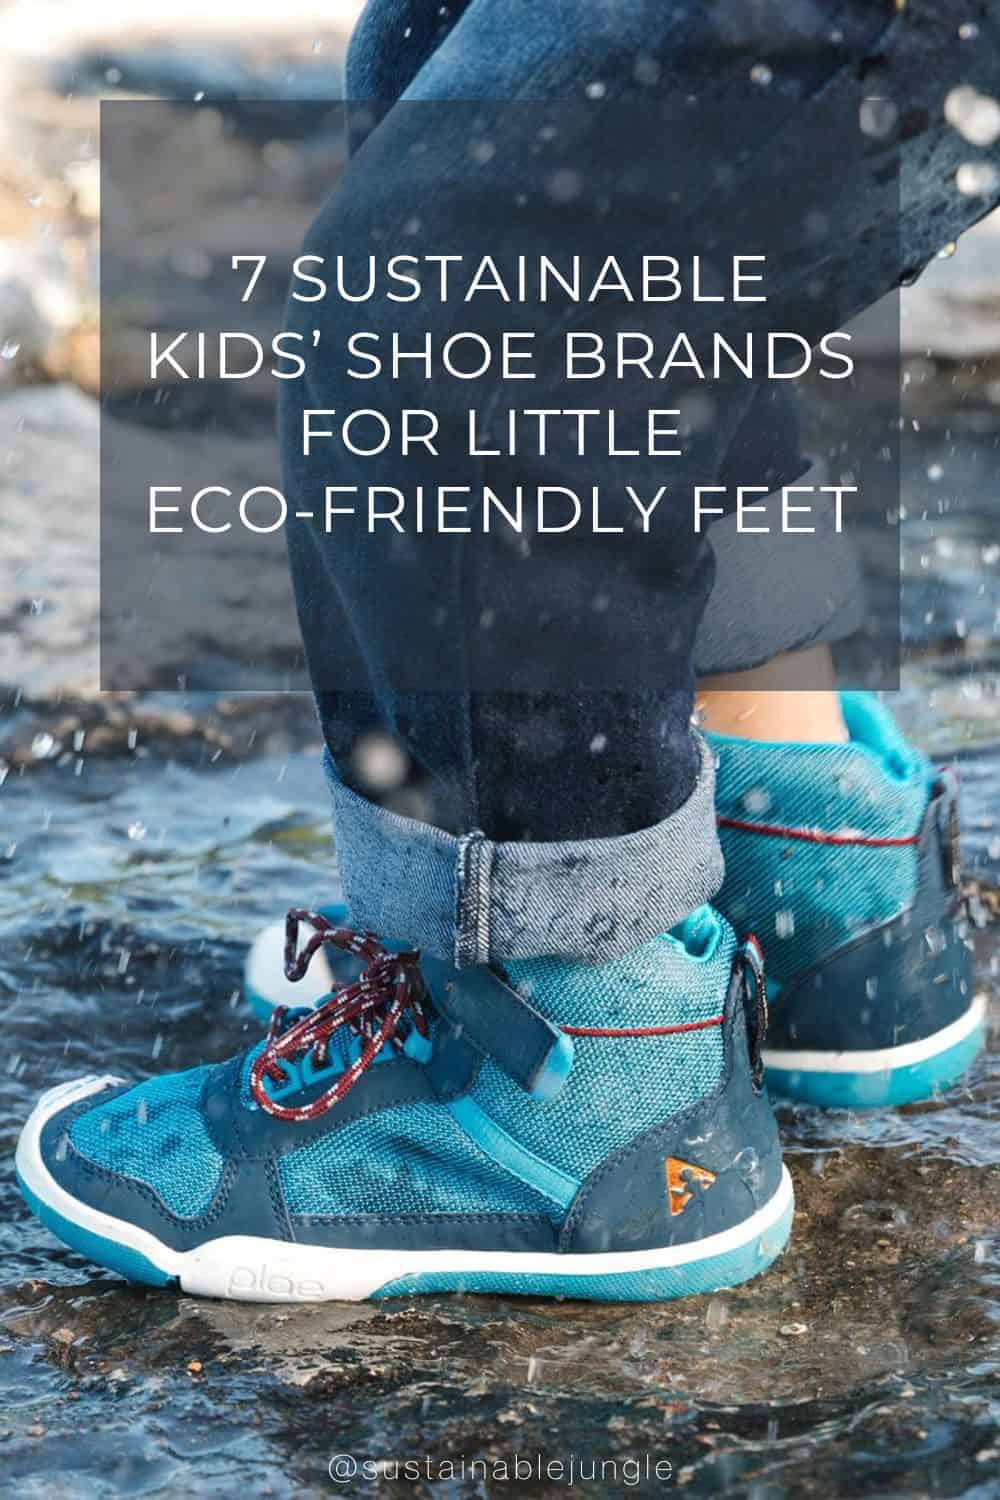 7 Sustainable Kids’ Shoe Brands for Little Eco-Friendly Feet Image by PLAE #sustainablekidsshoes #sustainableshoesforkids #kidssustainableshoes #ecofriendlykidsshoes #ecofriendlyshoesforkids #sustainablekidsshoebrands #sustainablejungle